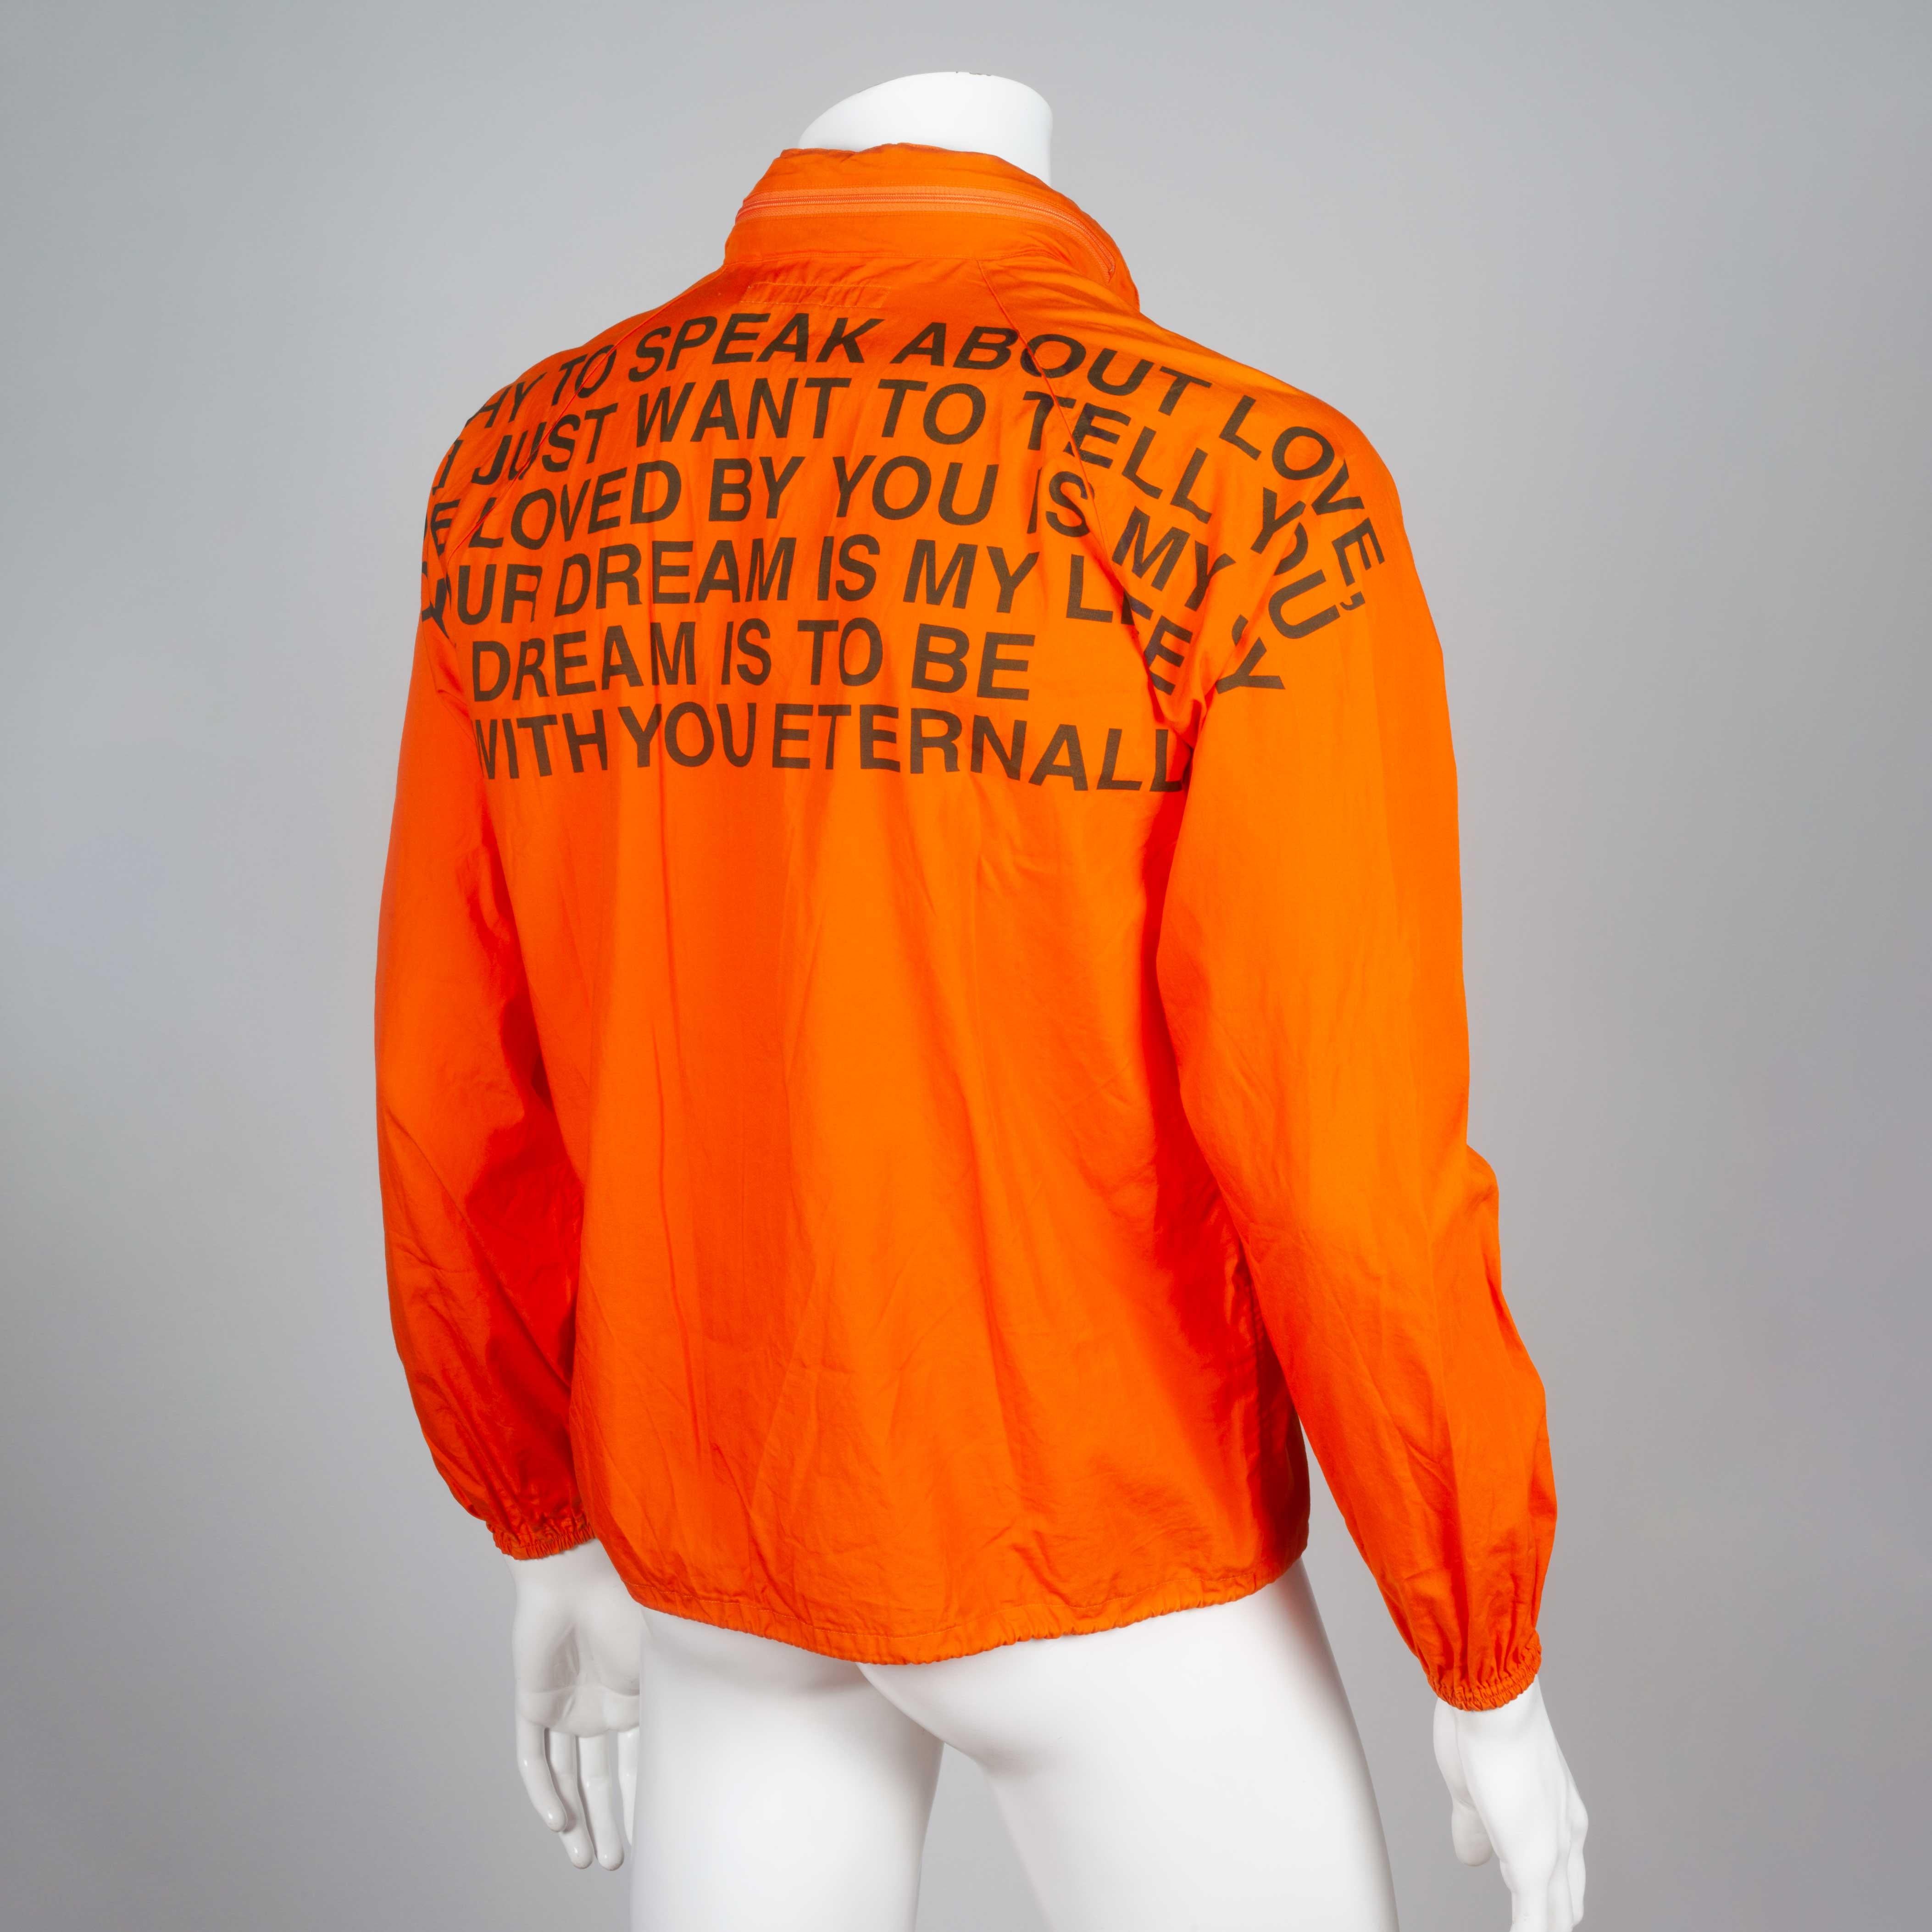 Junya Watanabe Comme des Garçons 2001 poem coat from Japan in bright orange. Poem on the back reads:

I'm shy to speak about love,
but I just want to tell you,
to love you is my joy
your dream is my life
my dream is to be with you eternally

The